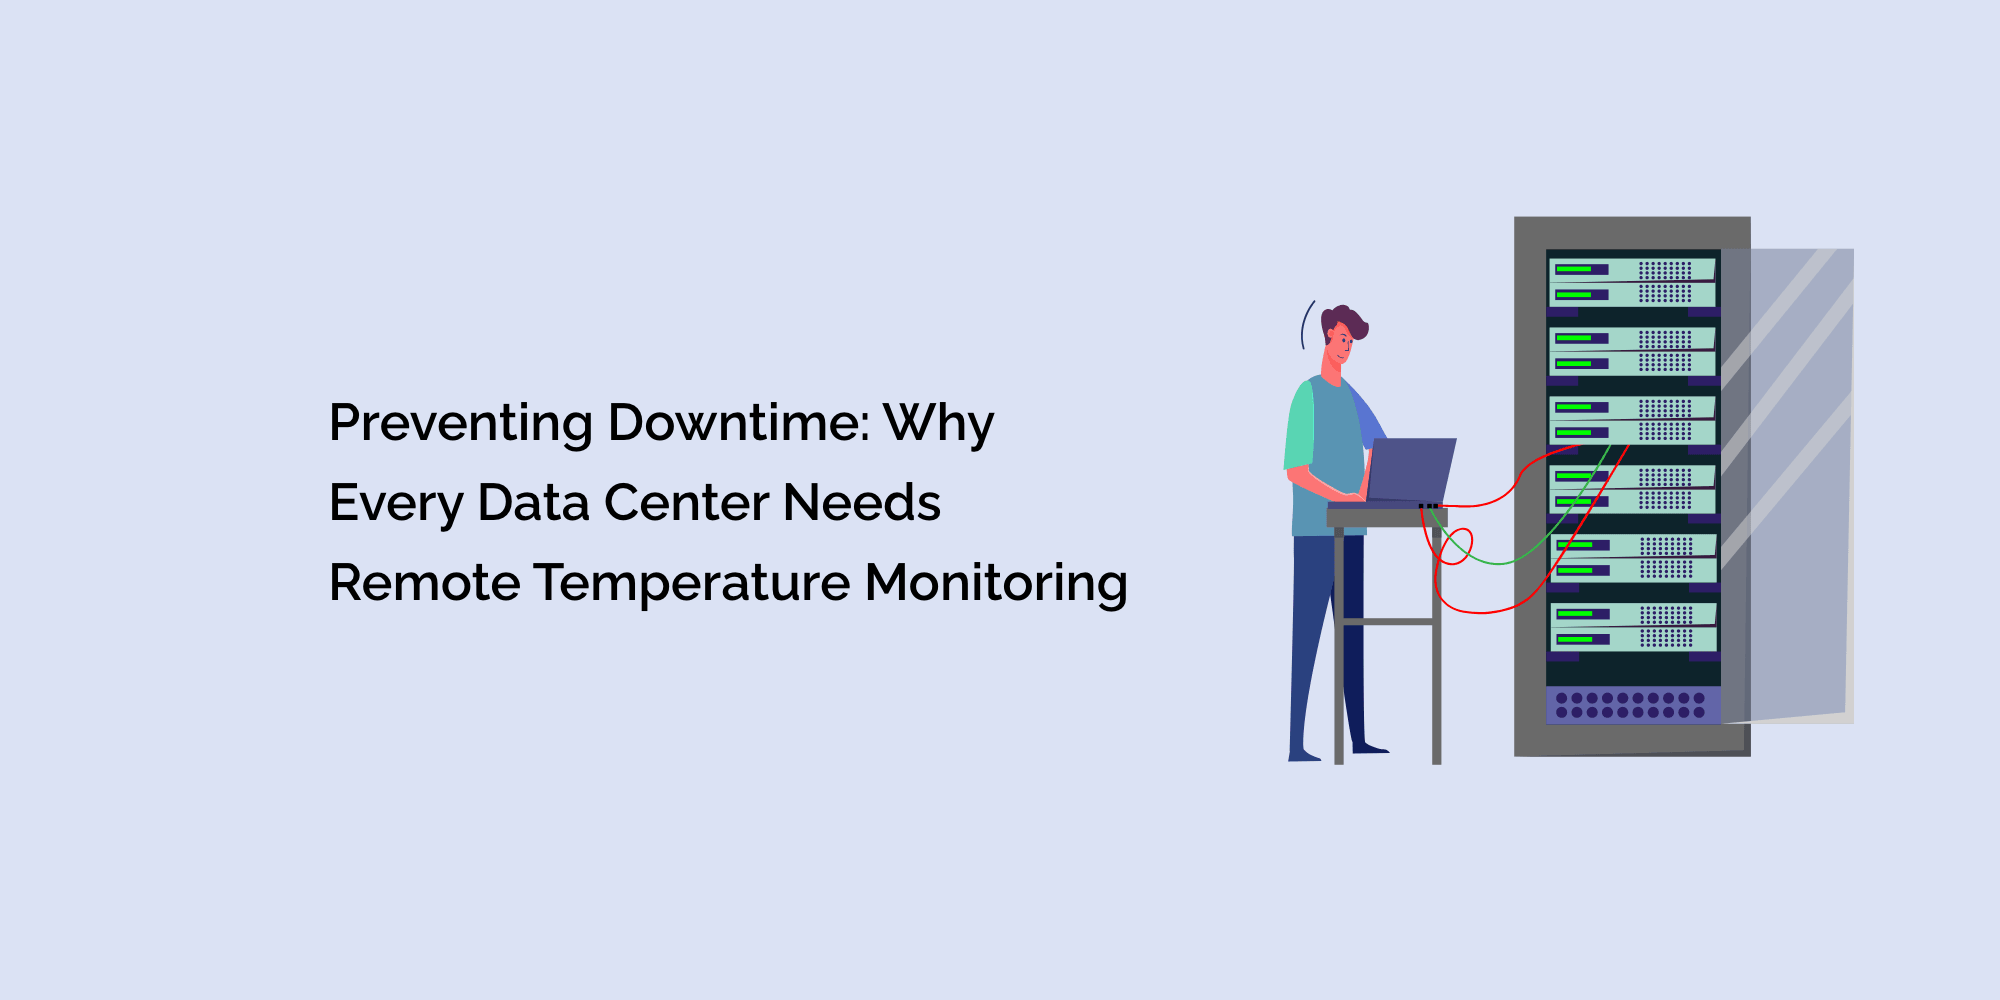 Preventing Downtime: Why Every Data Center Needs Remote Temperature Monitoring